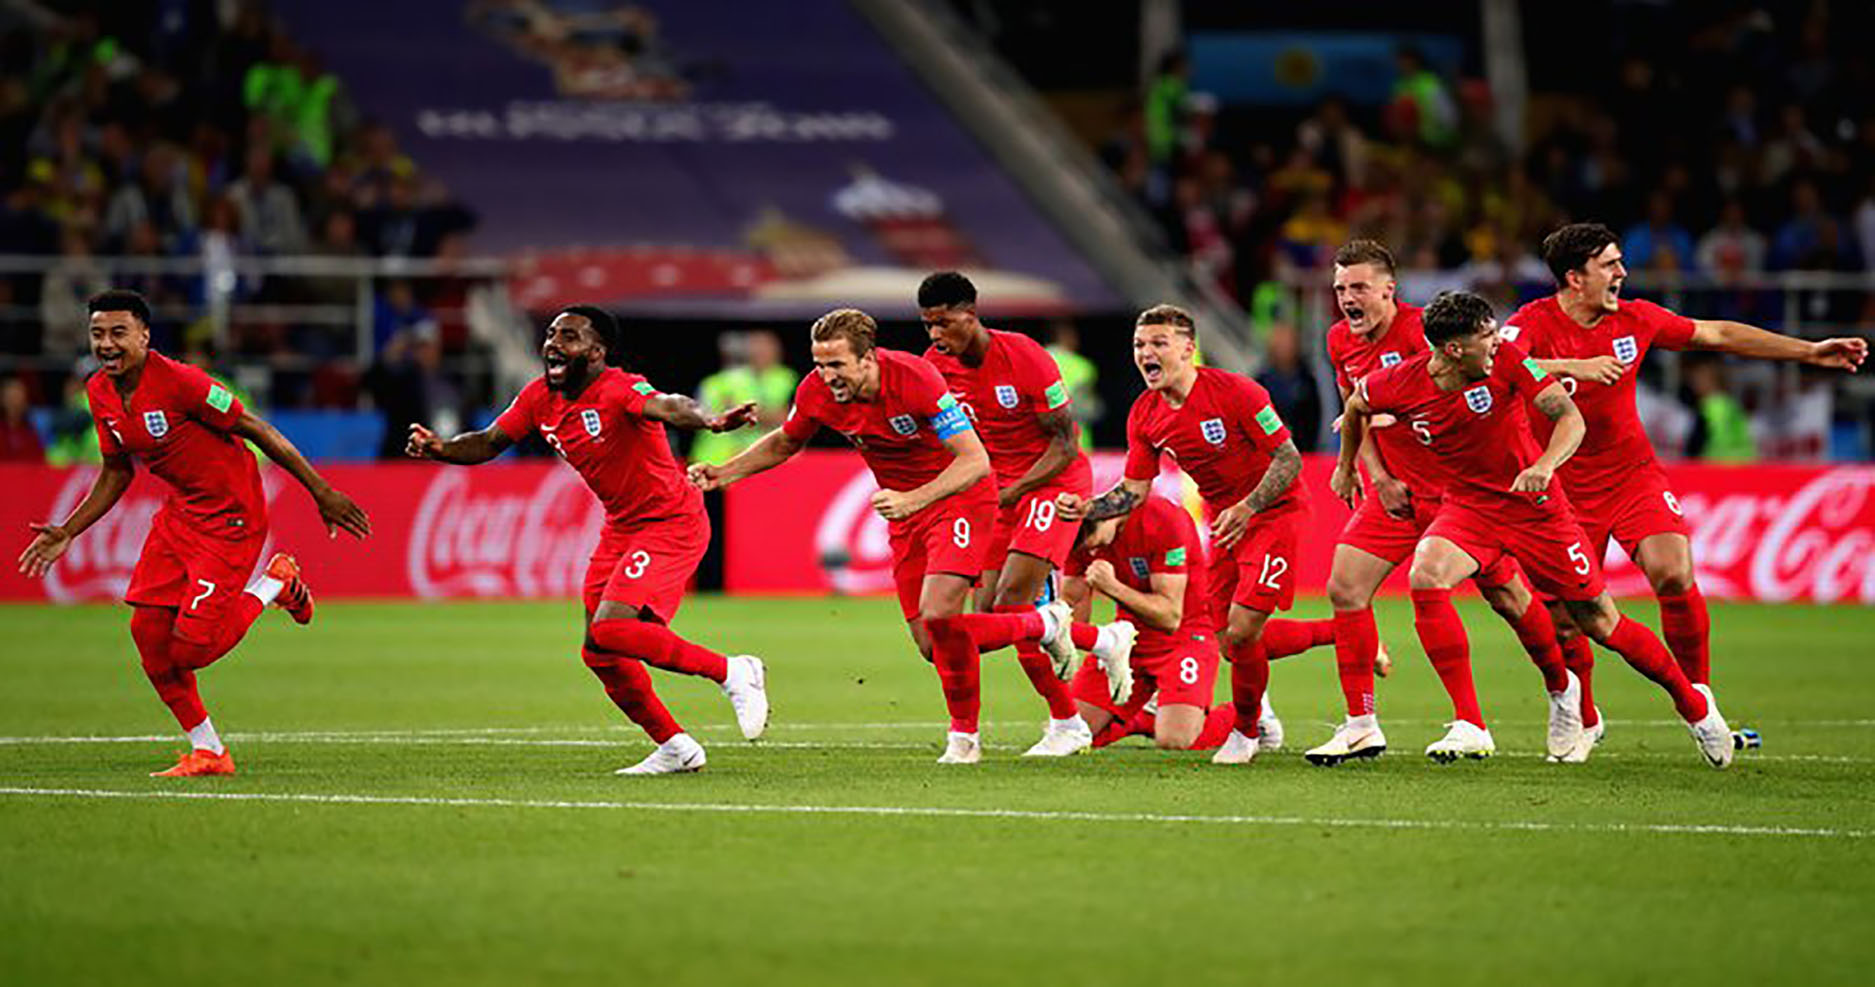 At FIFA World Cup 2018, England end penalty jinx to edge Colombia in shootout